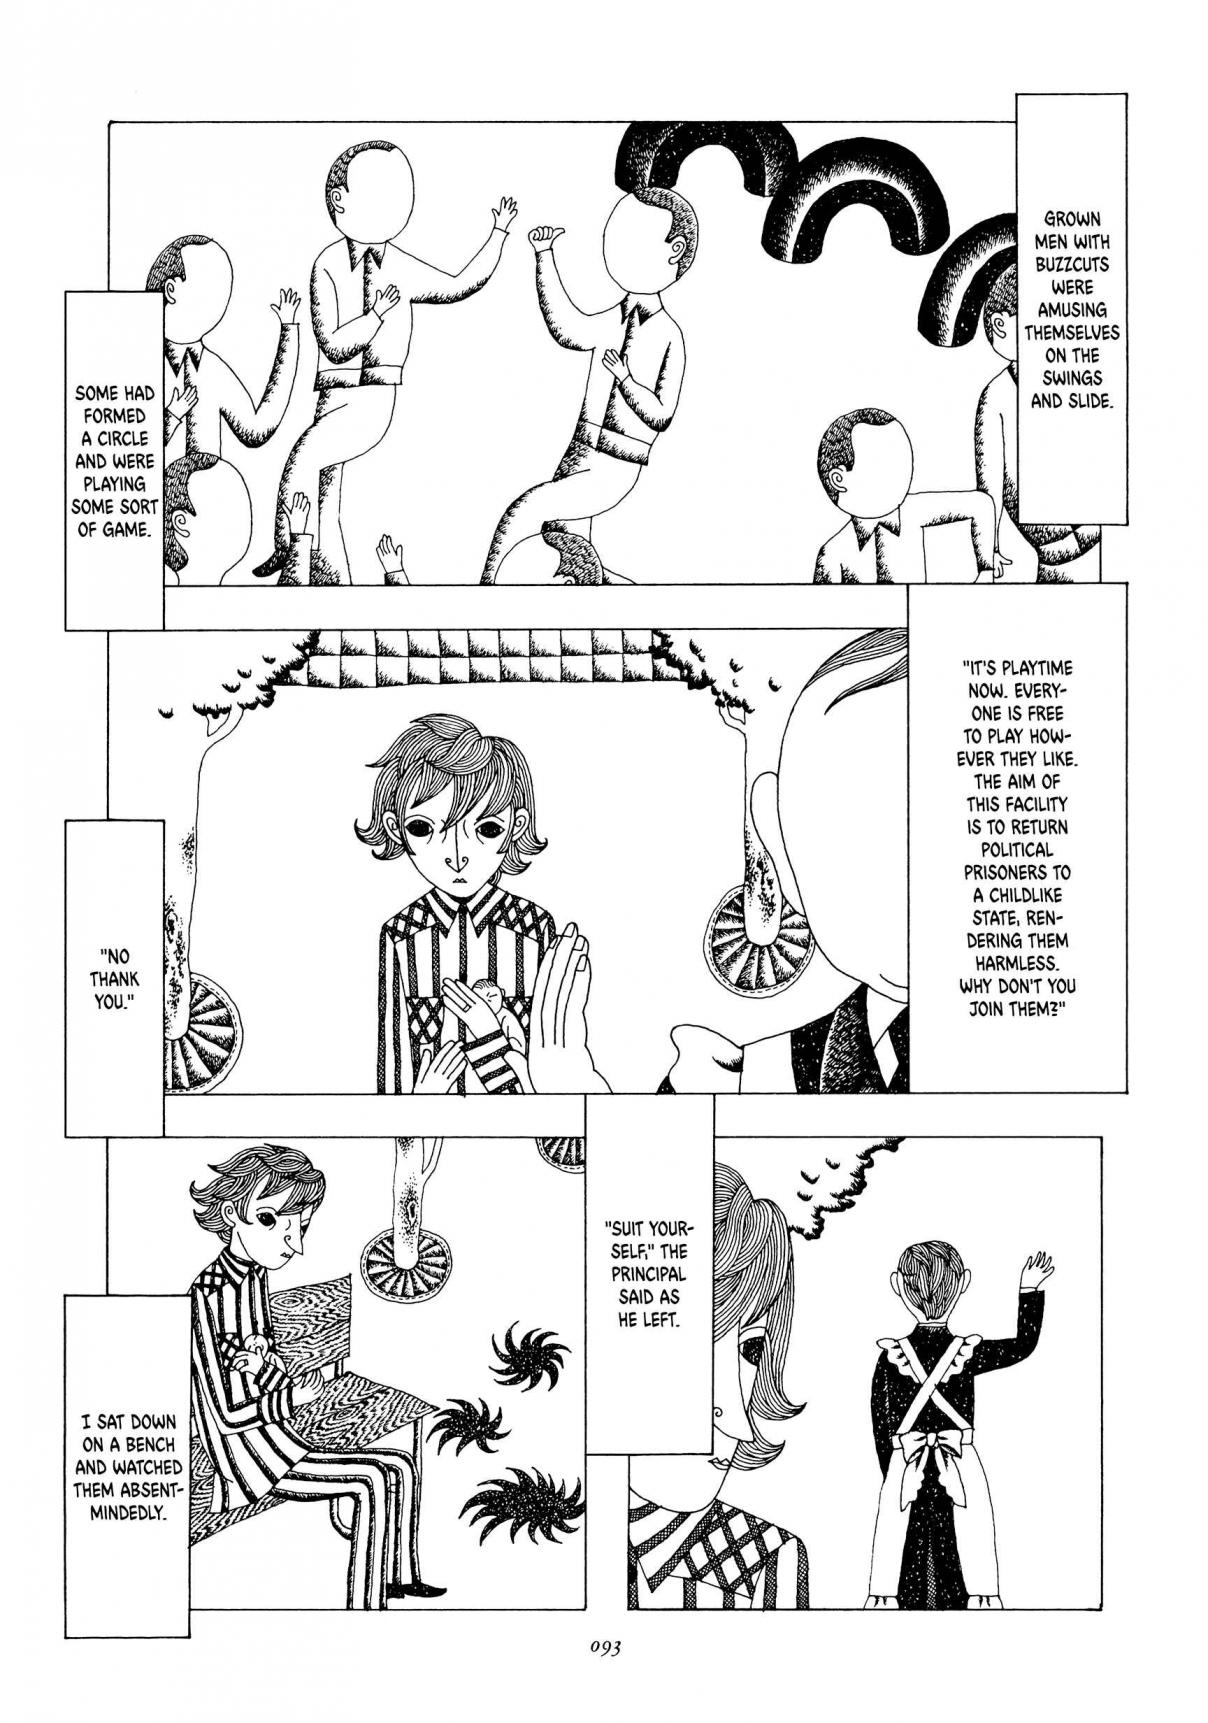 Kyuusai no Hi Vol. 1 Ch. 6 At the Detention Center for Political Prisoners